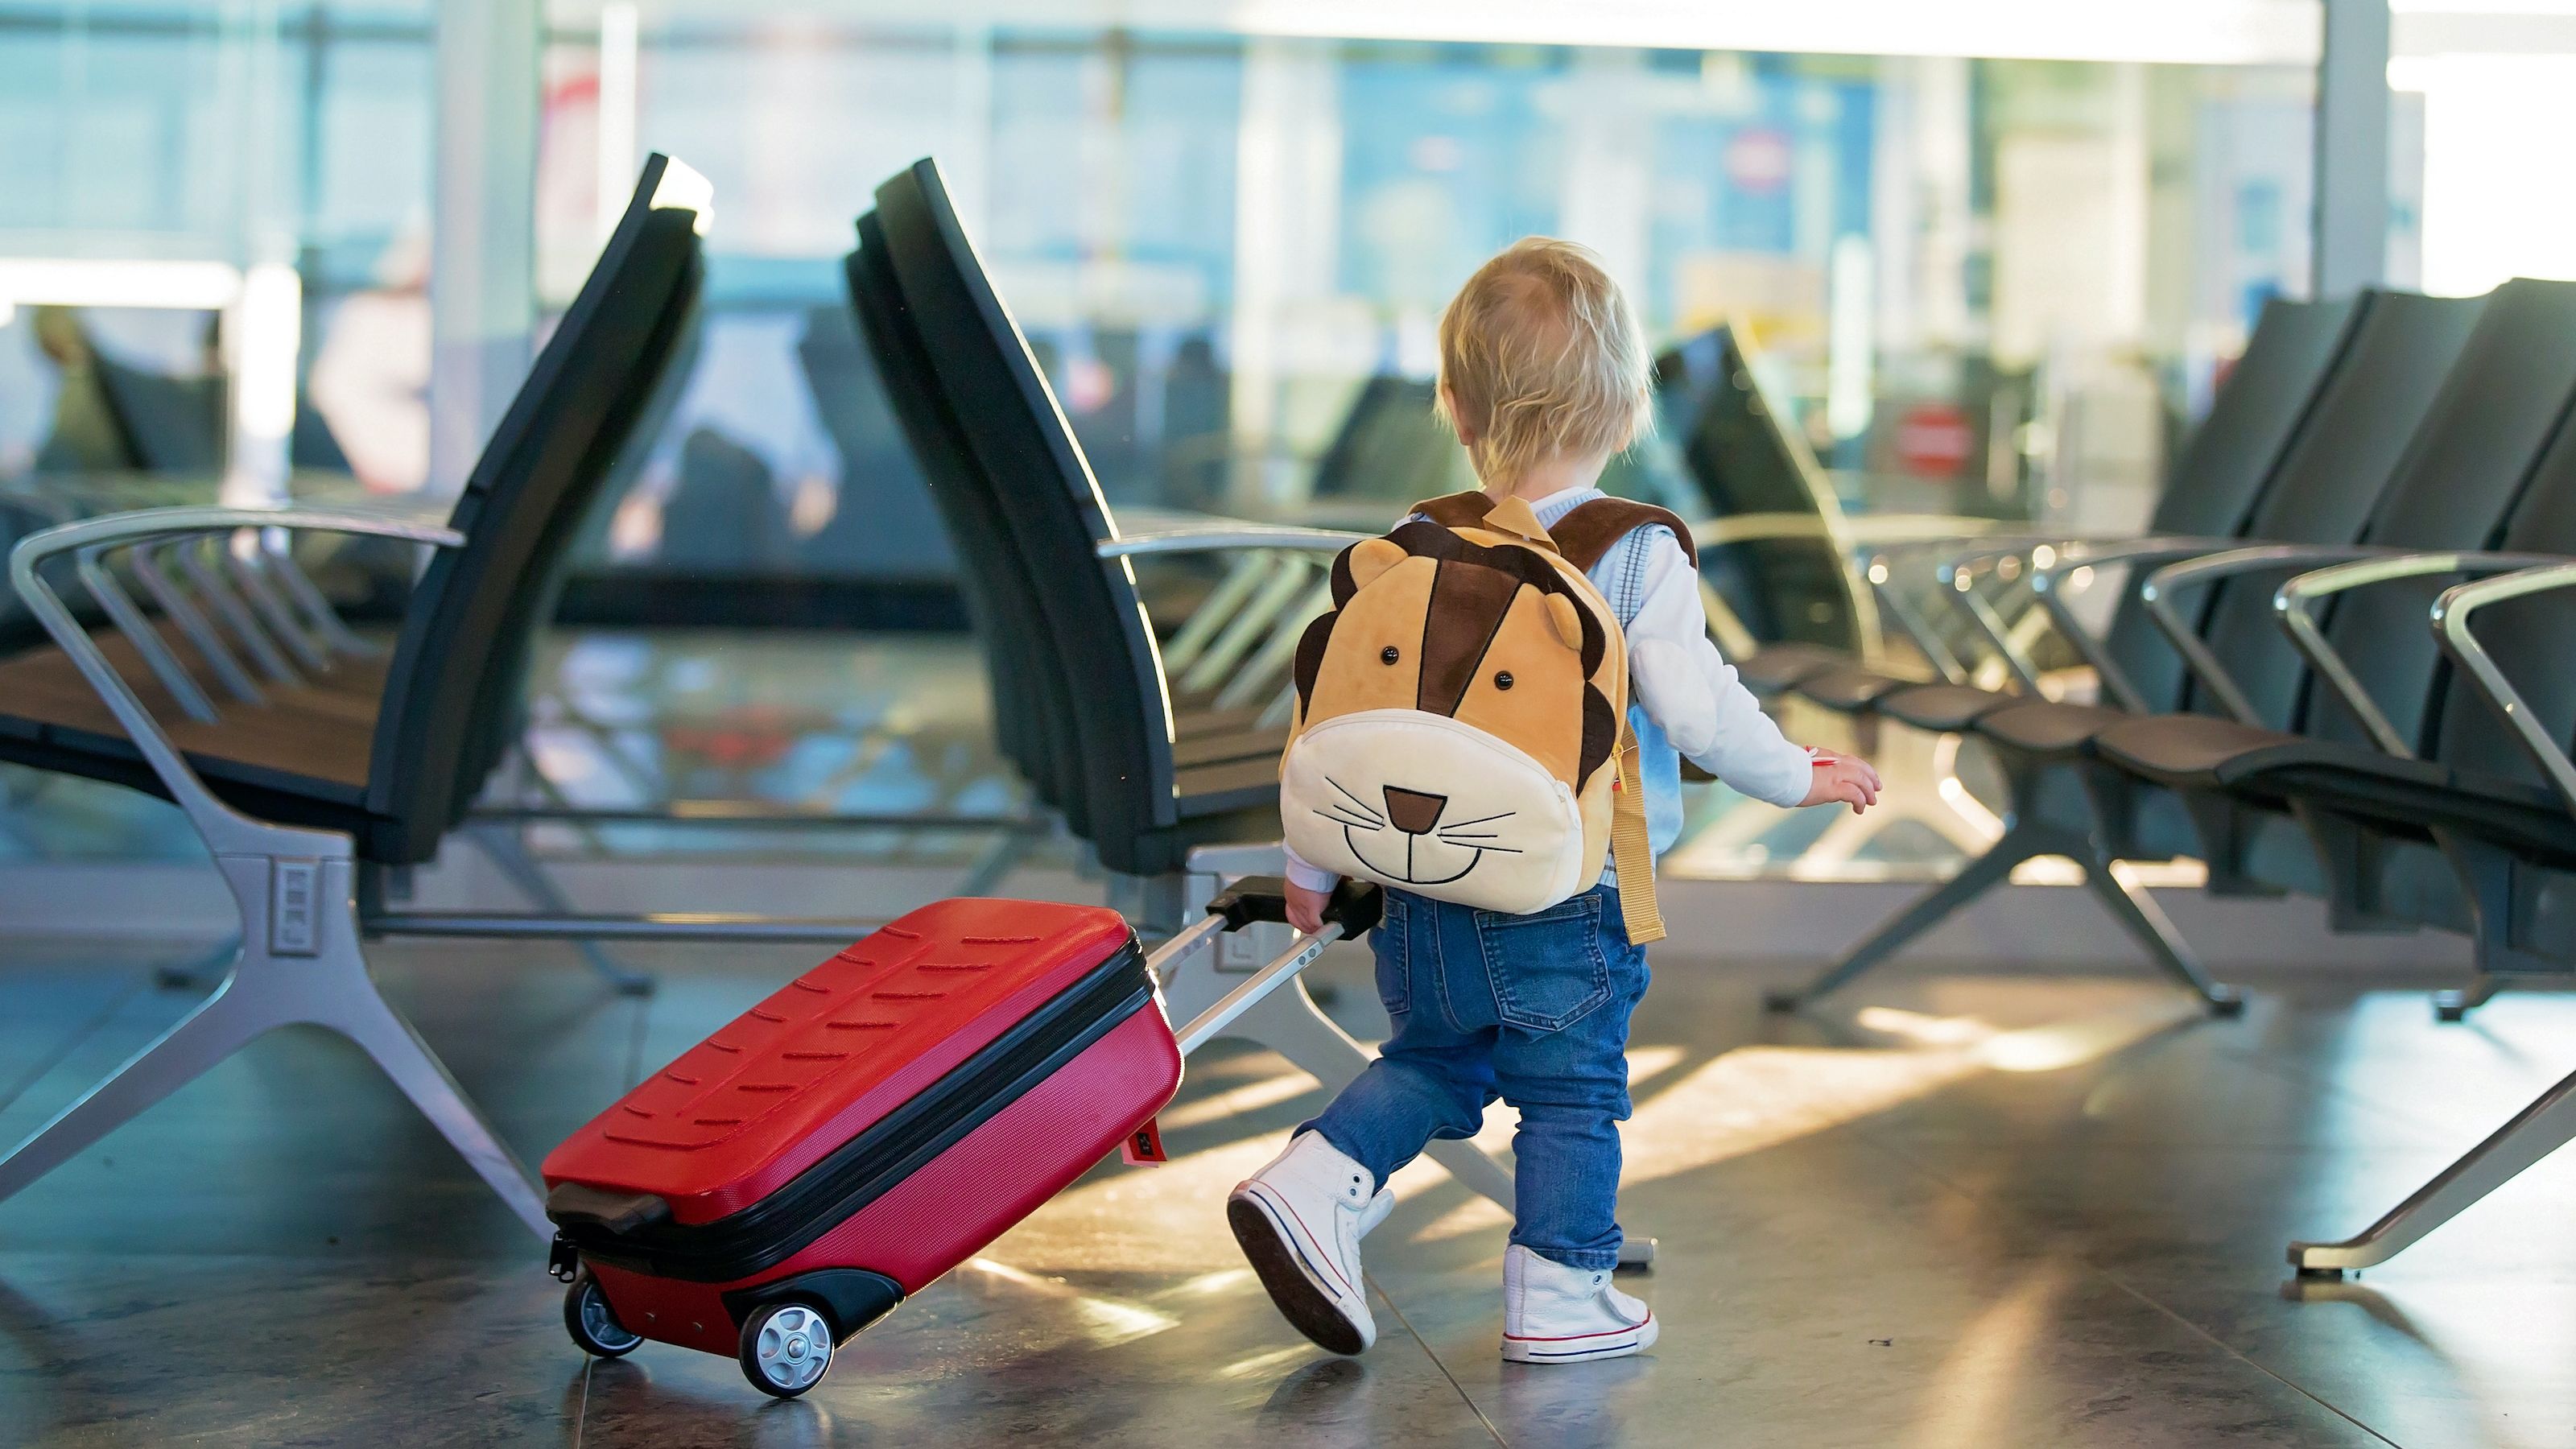 Kids Suitcases: Find Cute Carry On Luggage For Children